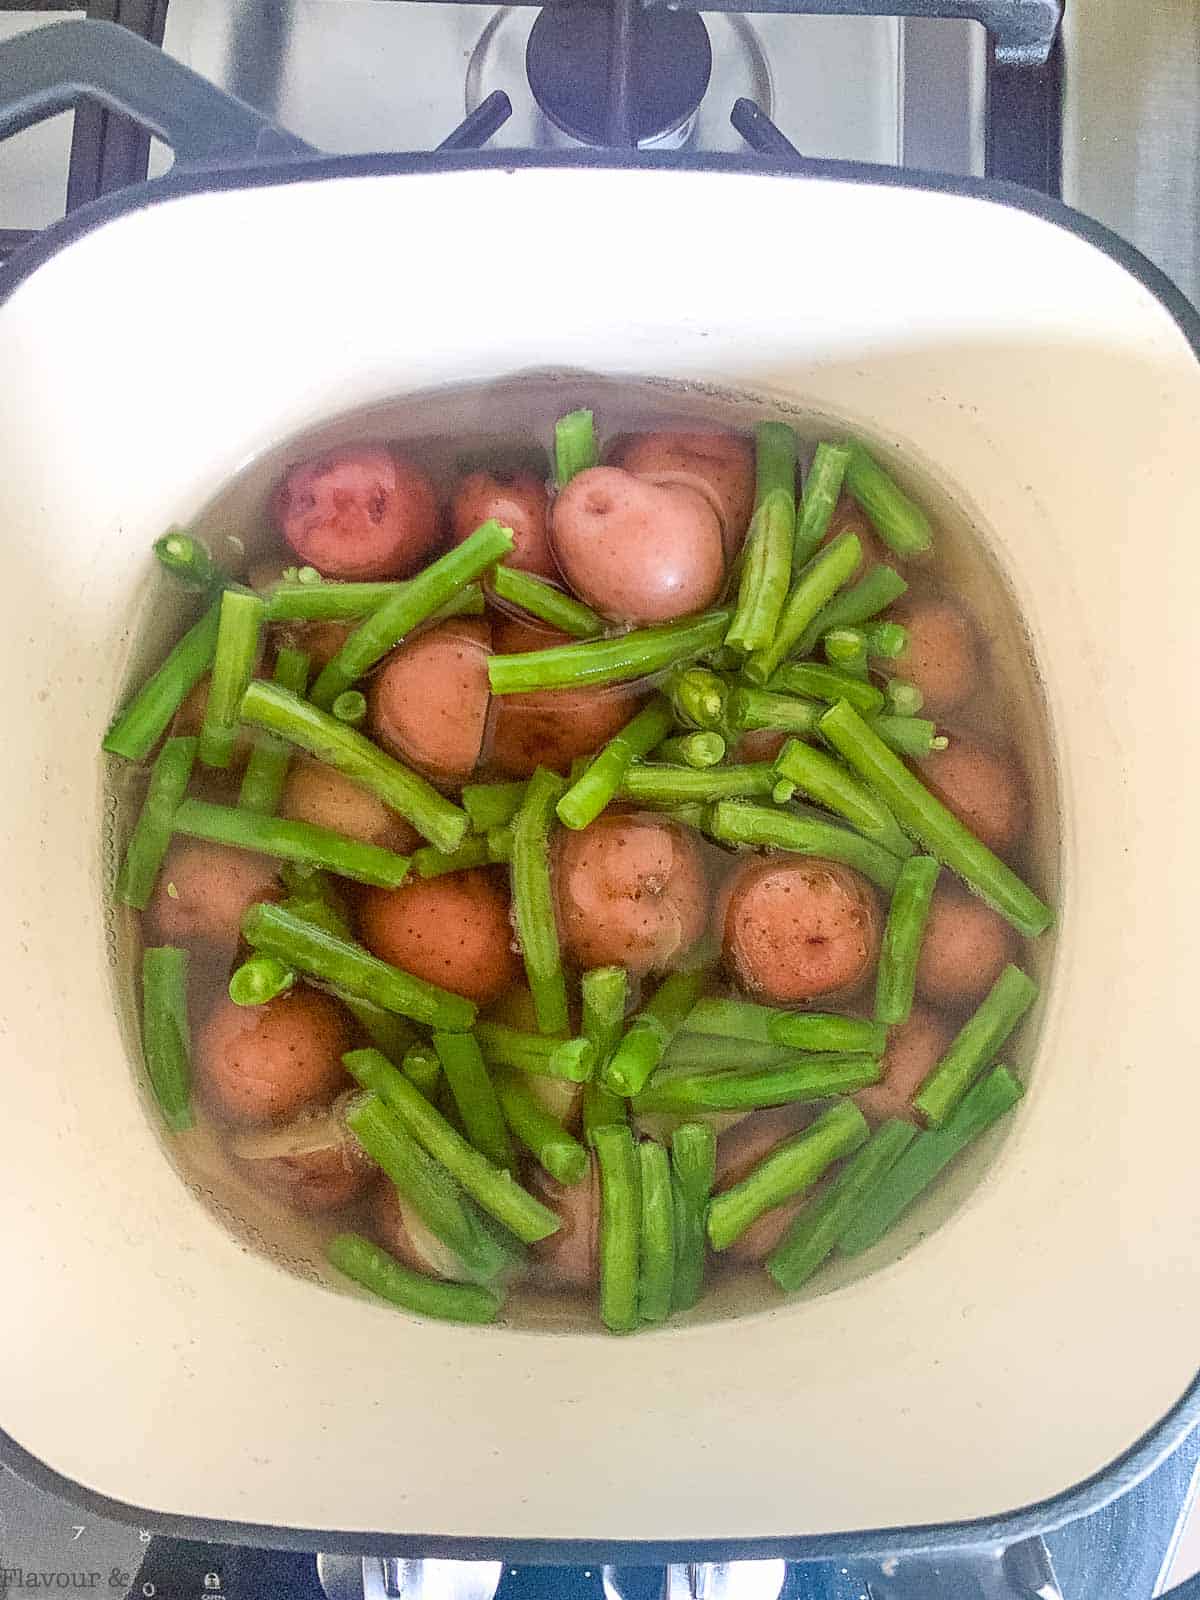 Green beans and potatoes in boiling water.